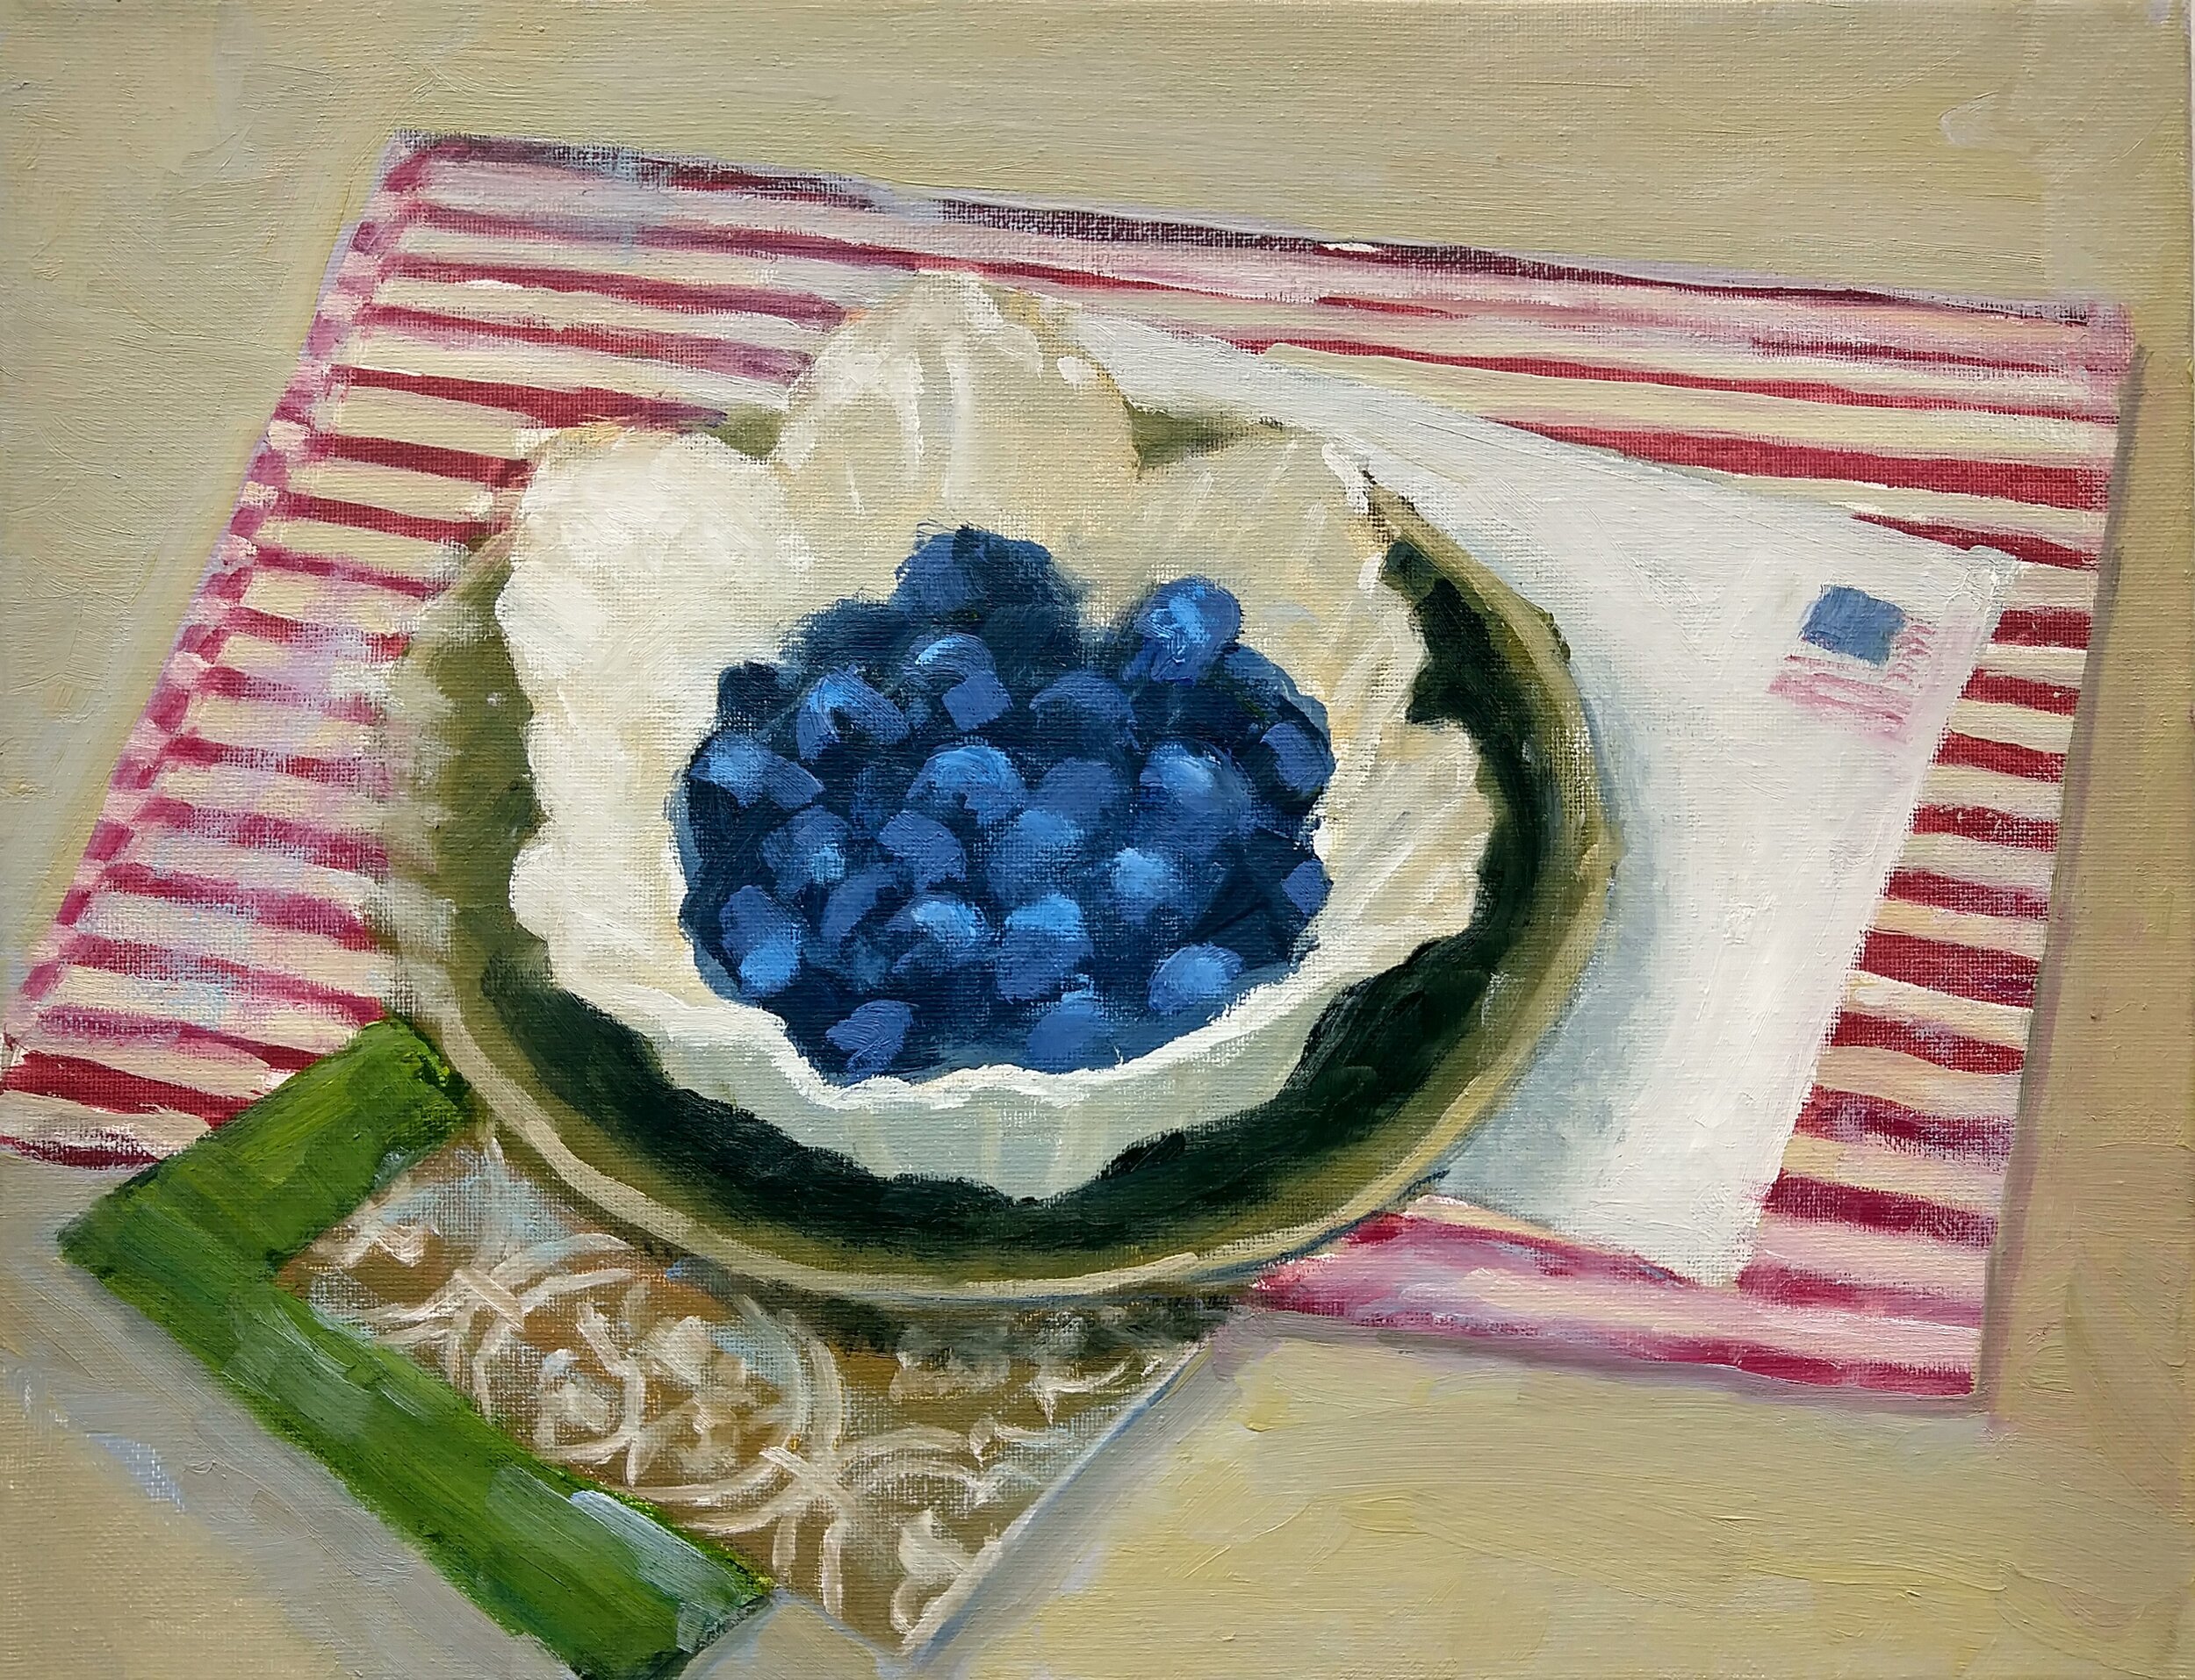 Blueberries in a Bowl on Red & White Striped Cloth